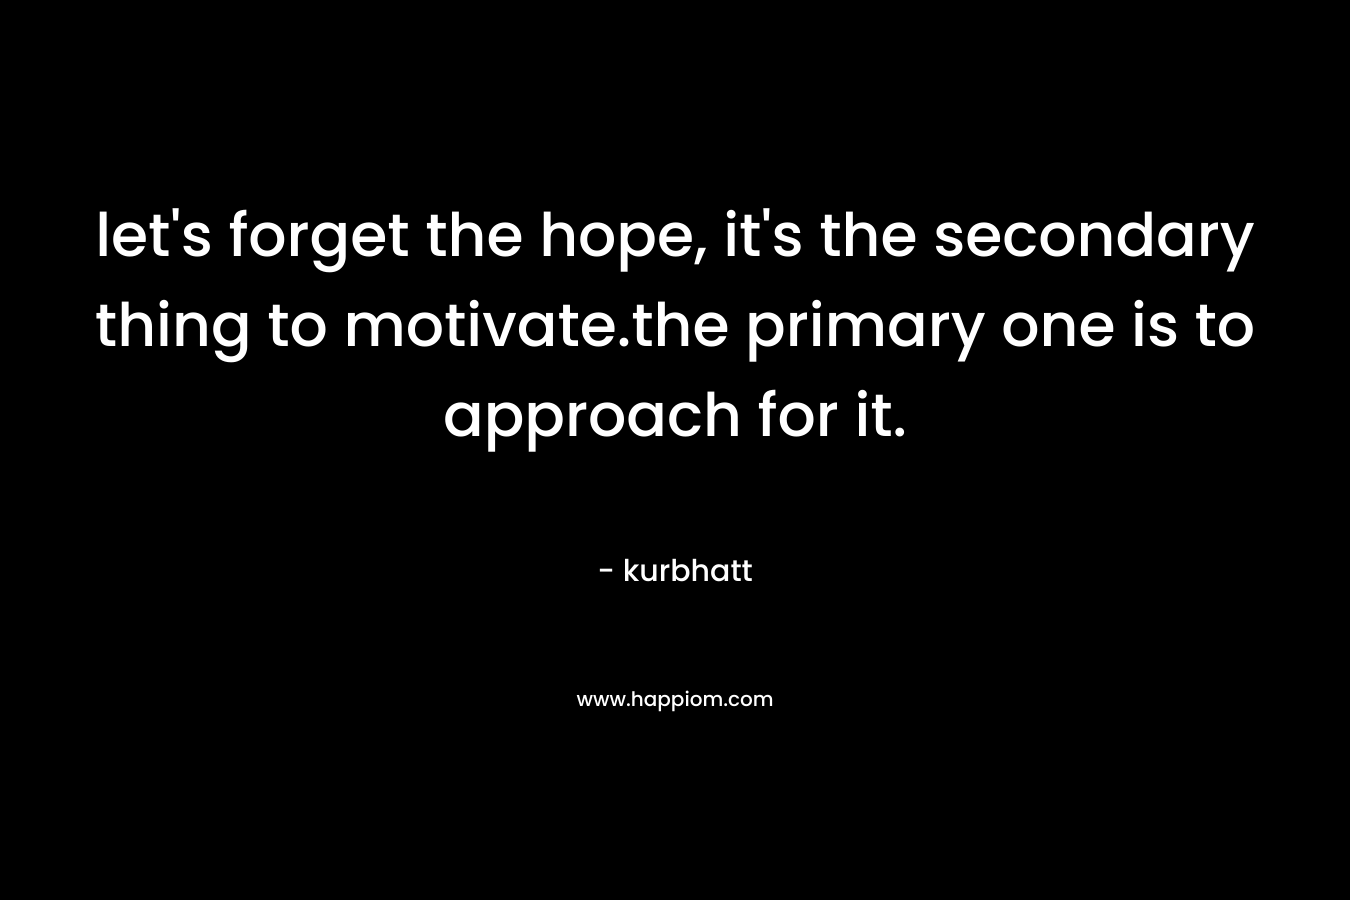 let's forget the hope, it's the secondary thing to motivate.the primary one is to approach for it.